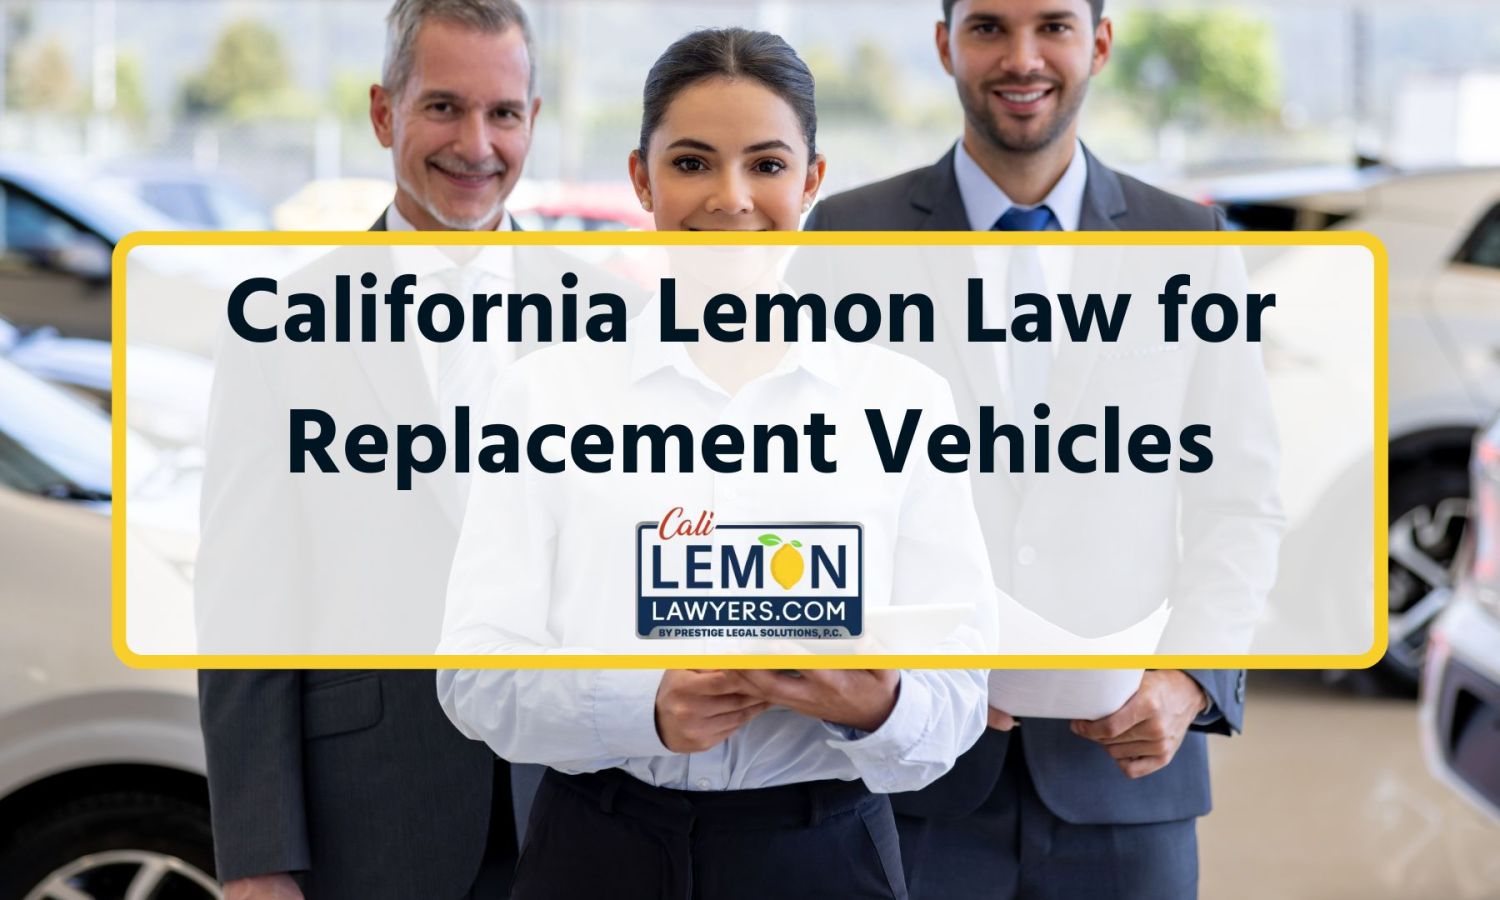 California Lemon Law for Replacement Vehicles and New Cars